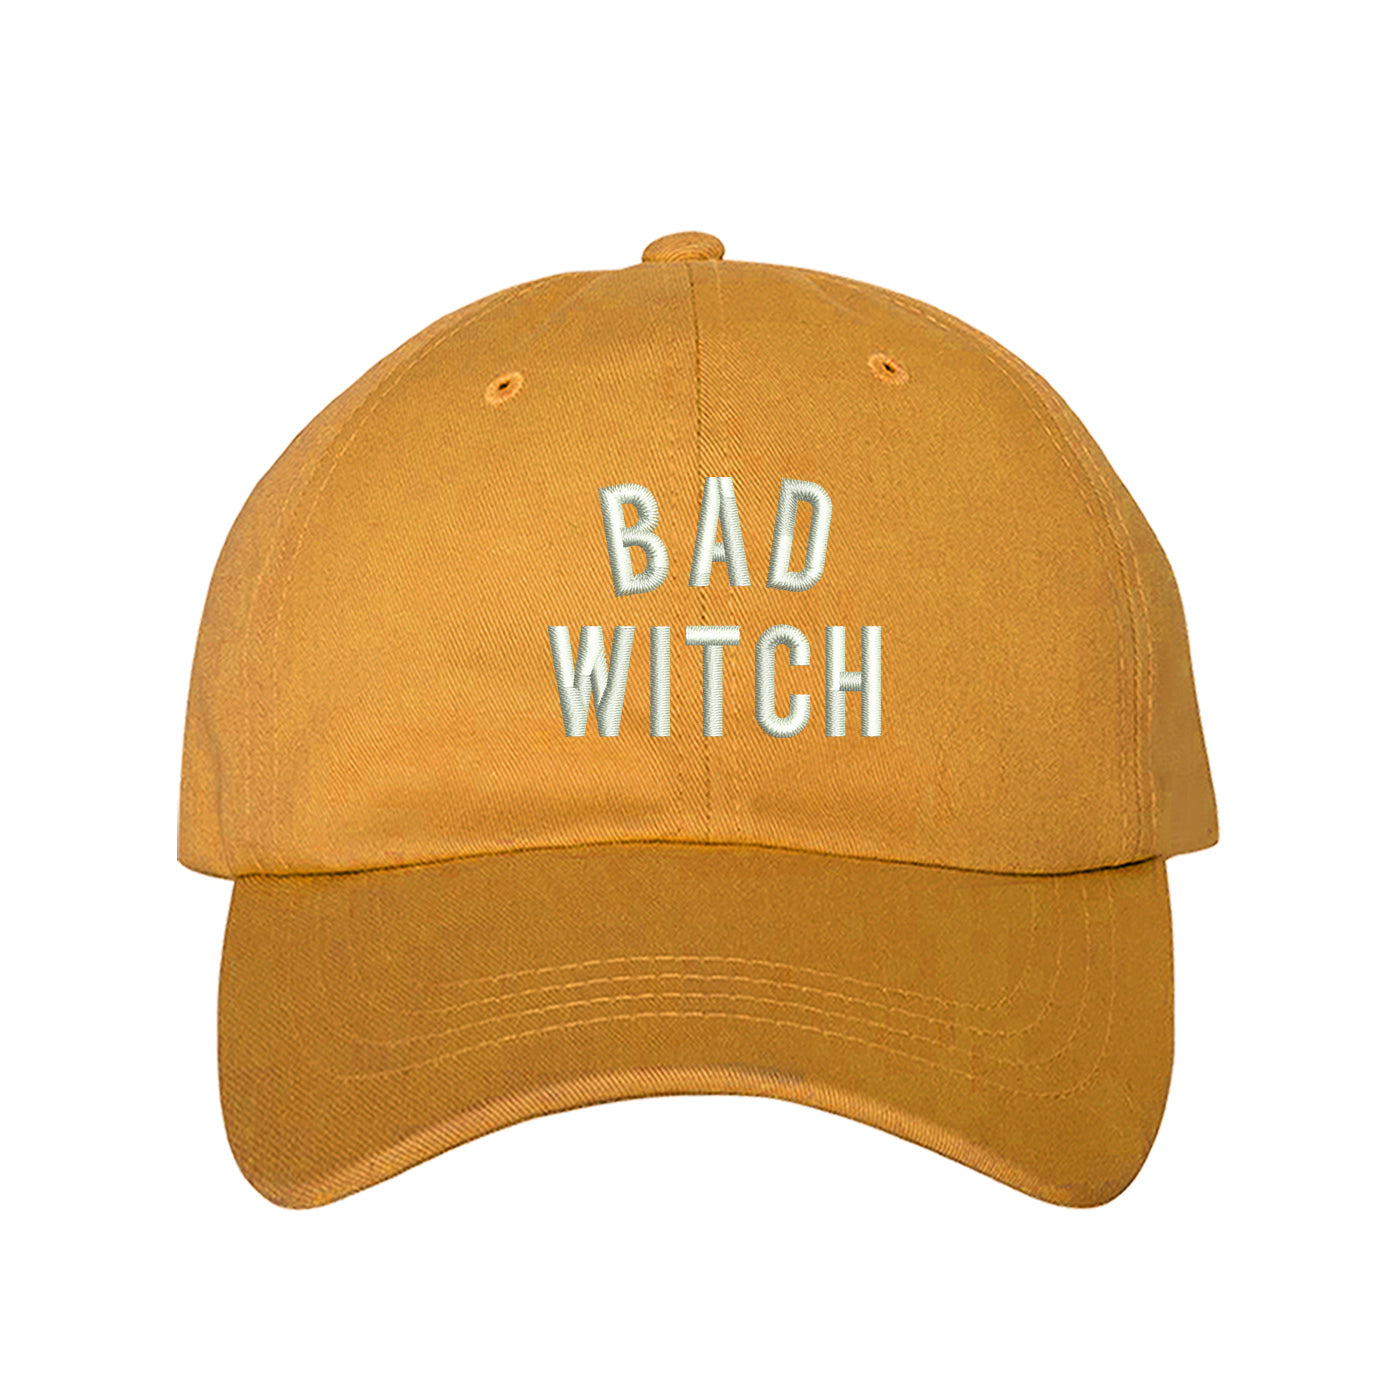 Unisex Bad Witch Dad Hat, Baseball Hat, Bad Witch Hats, Witch, Embroidered Hat, Embroidered Bad Witch, Custom Embroidery, DSY Lifestyle Hats, Yellow Dad Hat, Made in LA